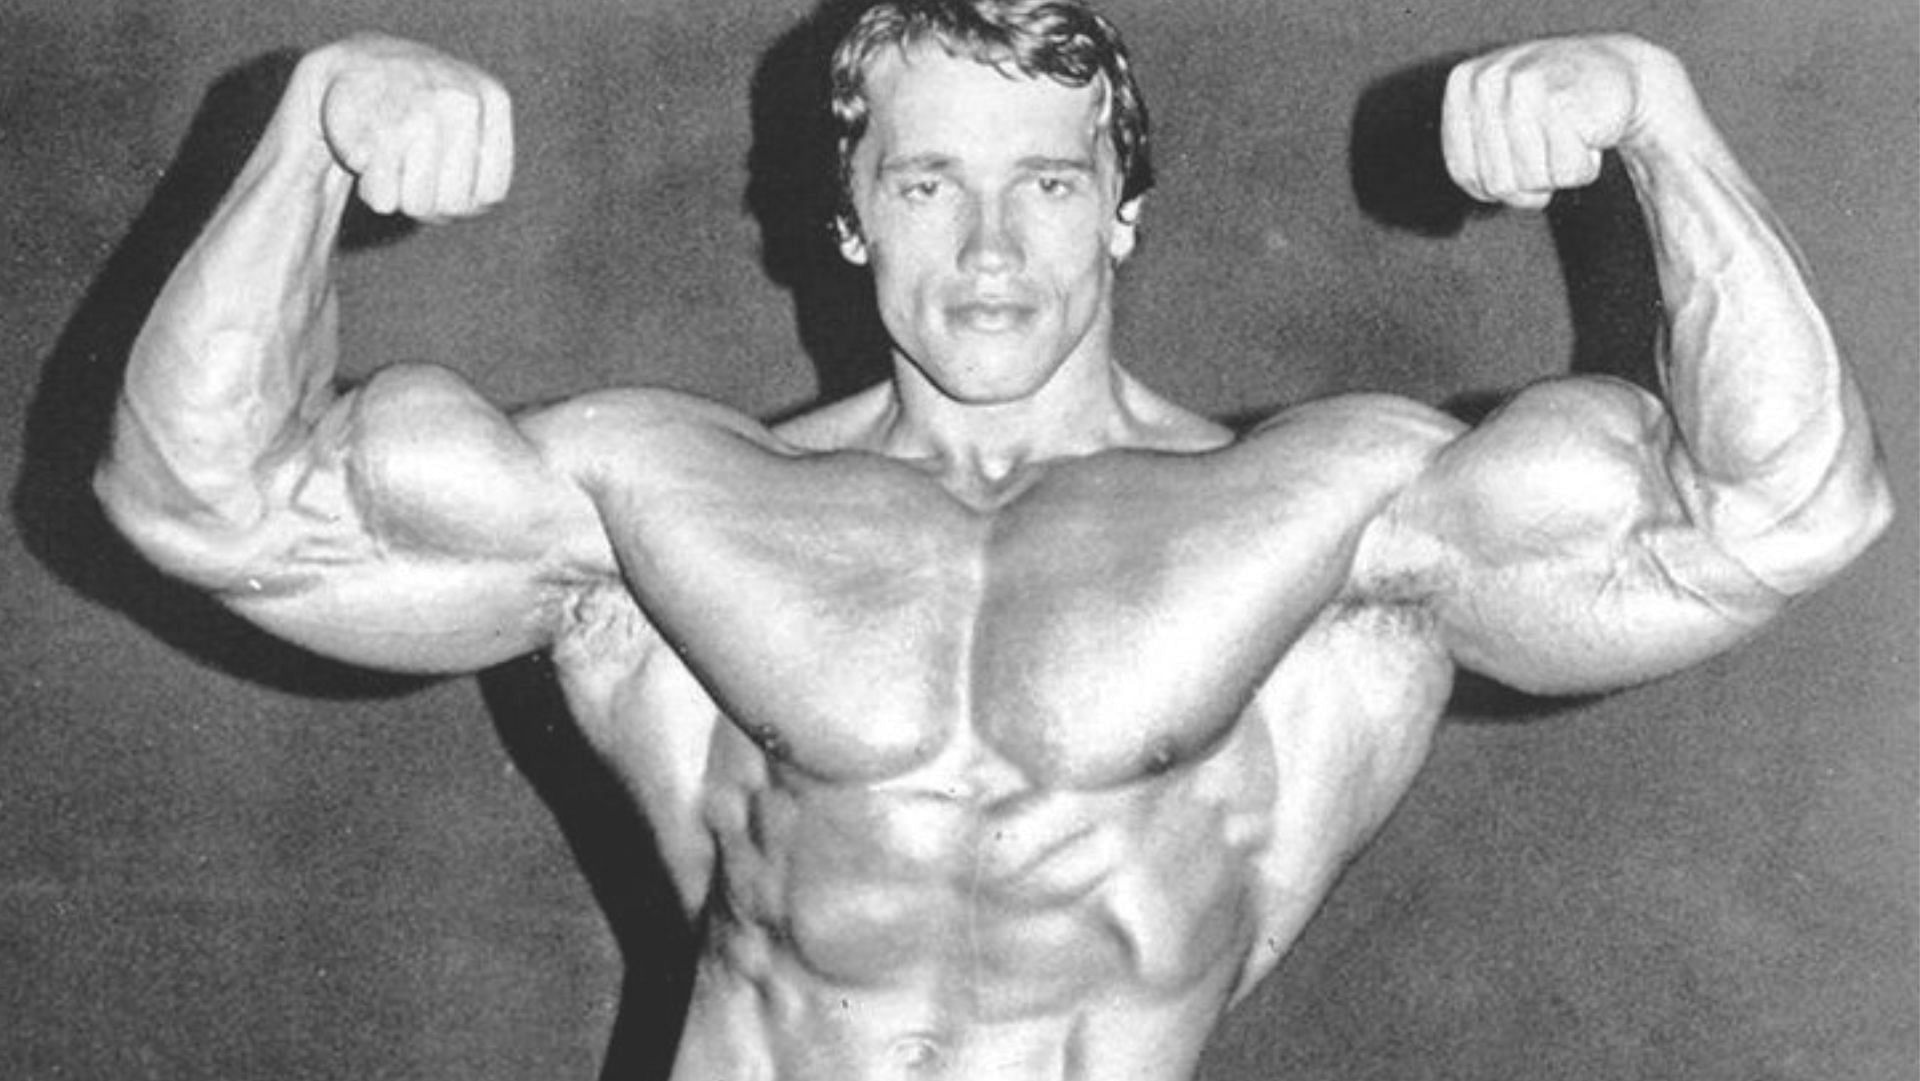 Top 6 Best Arm Exercises for Toned Muscles: Arnold's Ultimate Arm